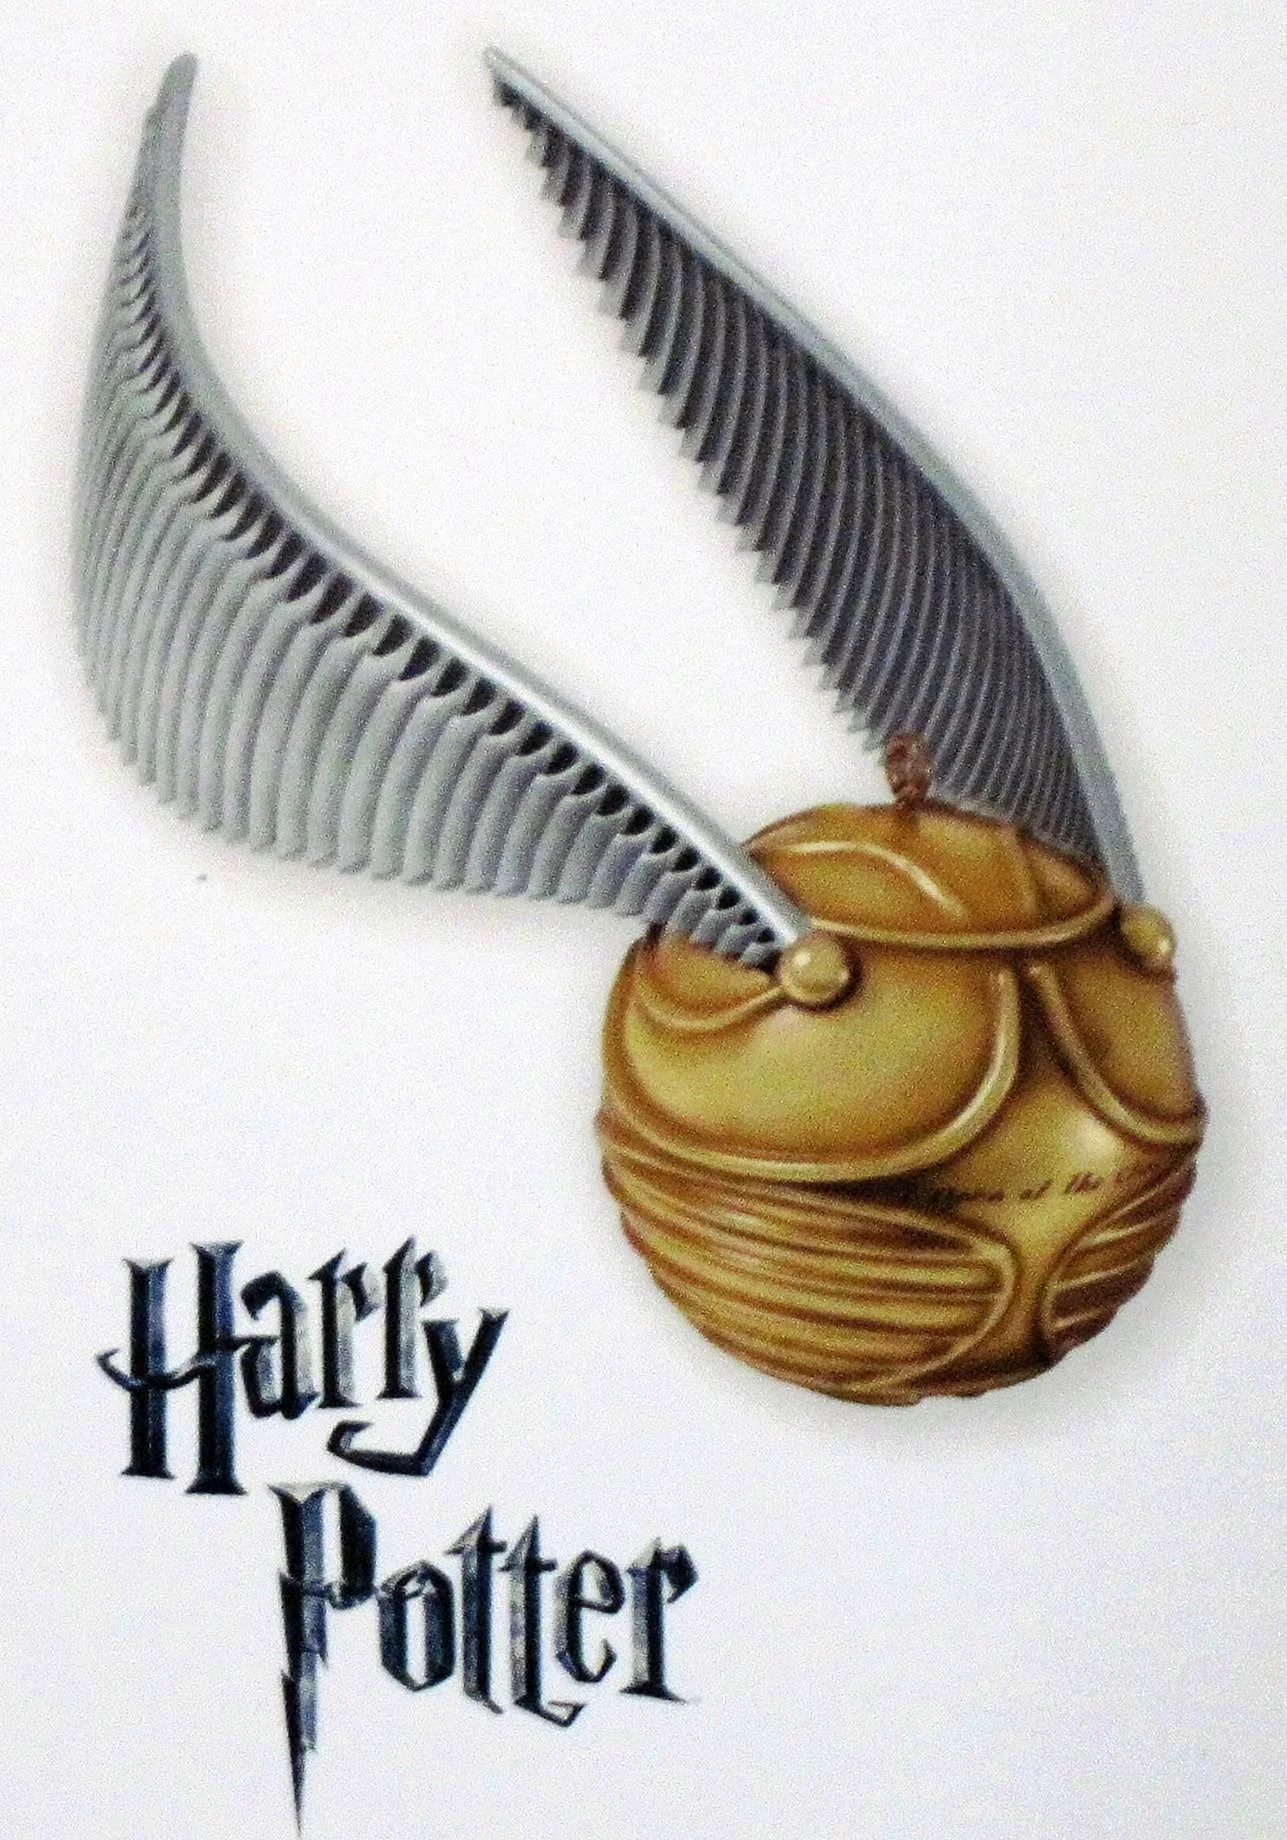 Harry Potter Snitch Wallpaper